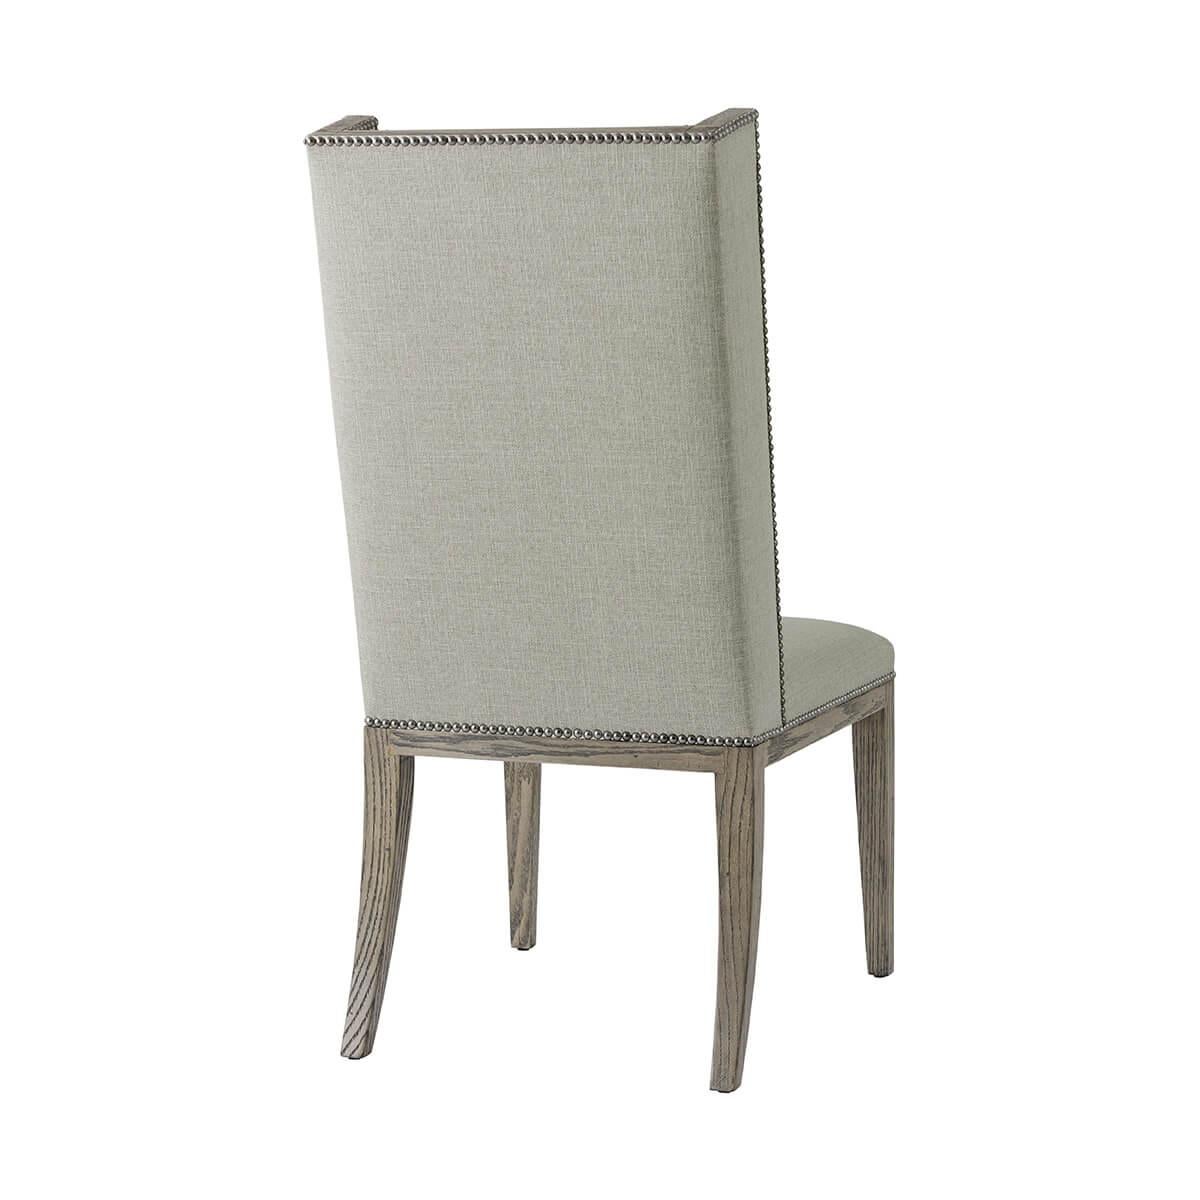 Upholstered Dining Chair in a grey echo oak finish frame. The slender winged back and seat are upholstered in performance fabric. Raised on square tapered legs.

Dimensions: 21.5